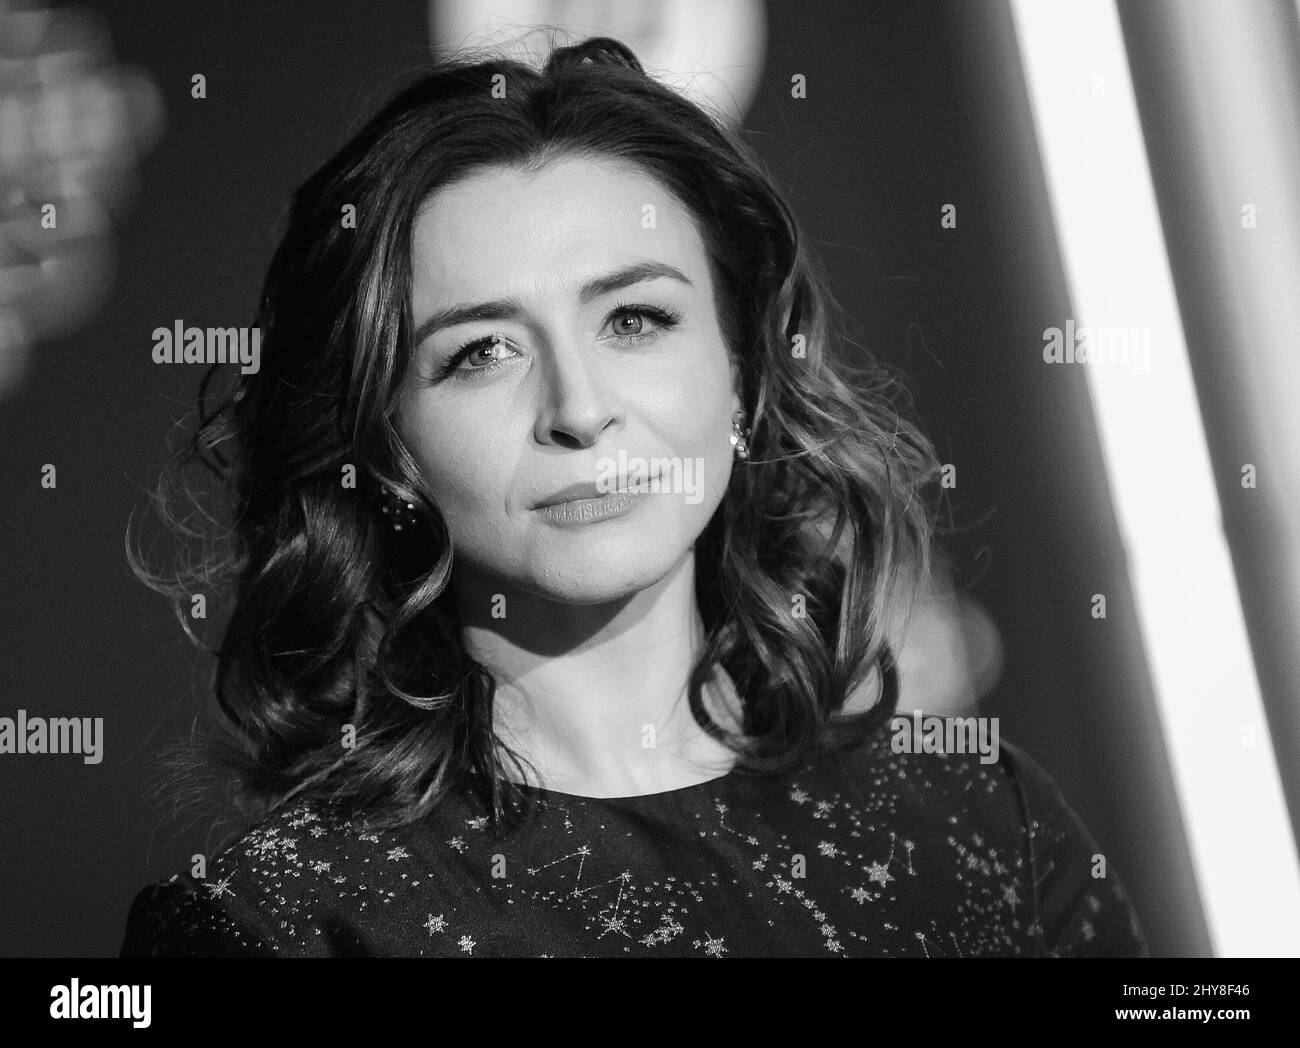 Caterina Scorsone attending the Star Wars: The Force Awakens Premiere Stock Photo